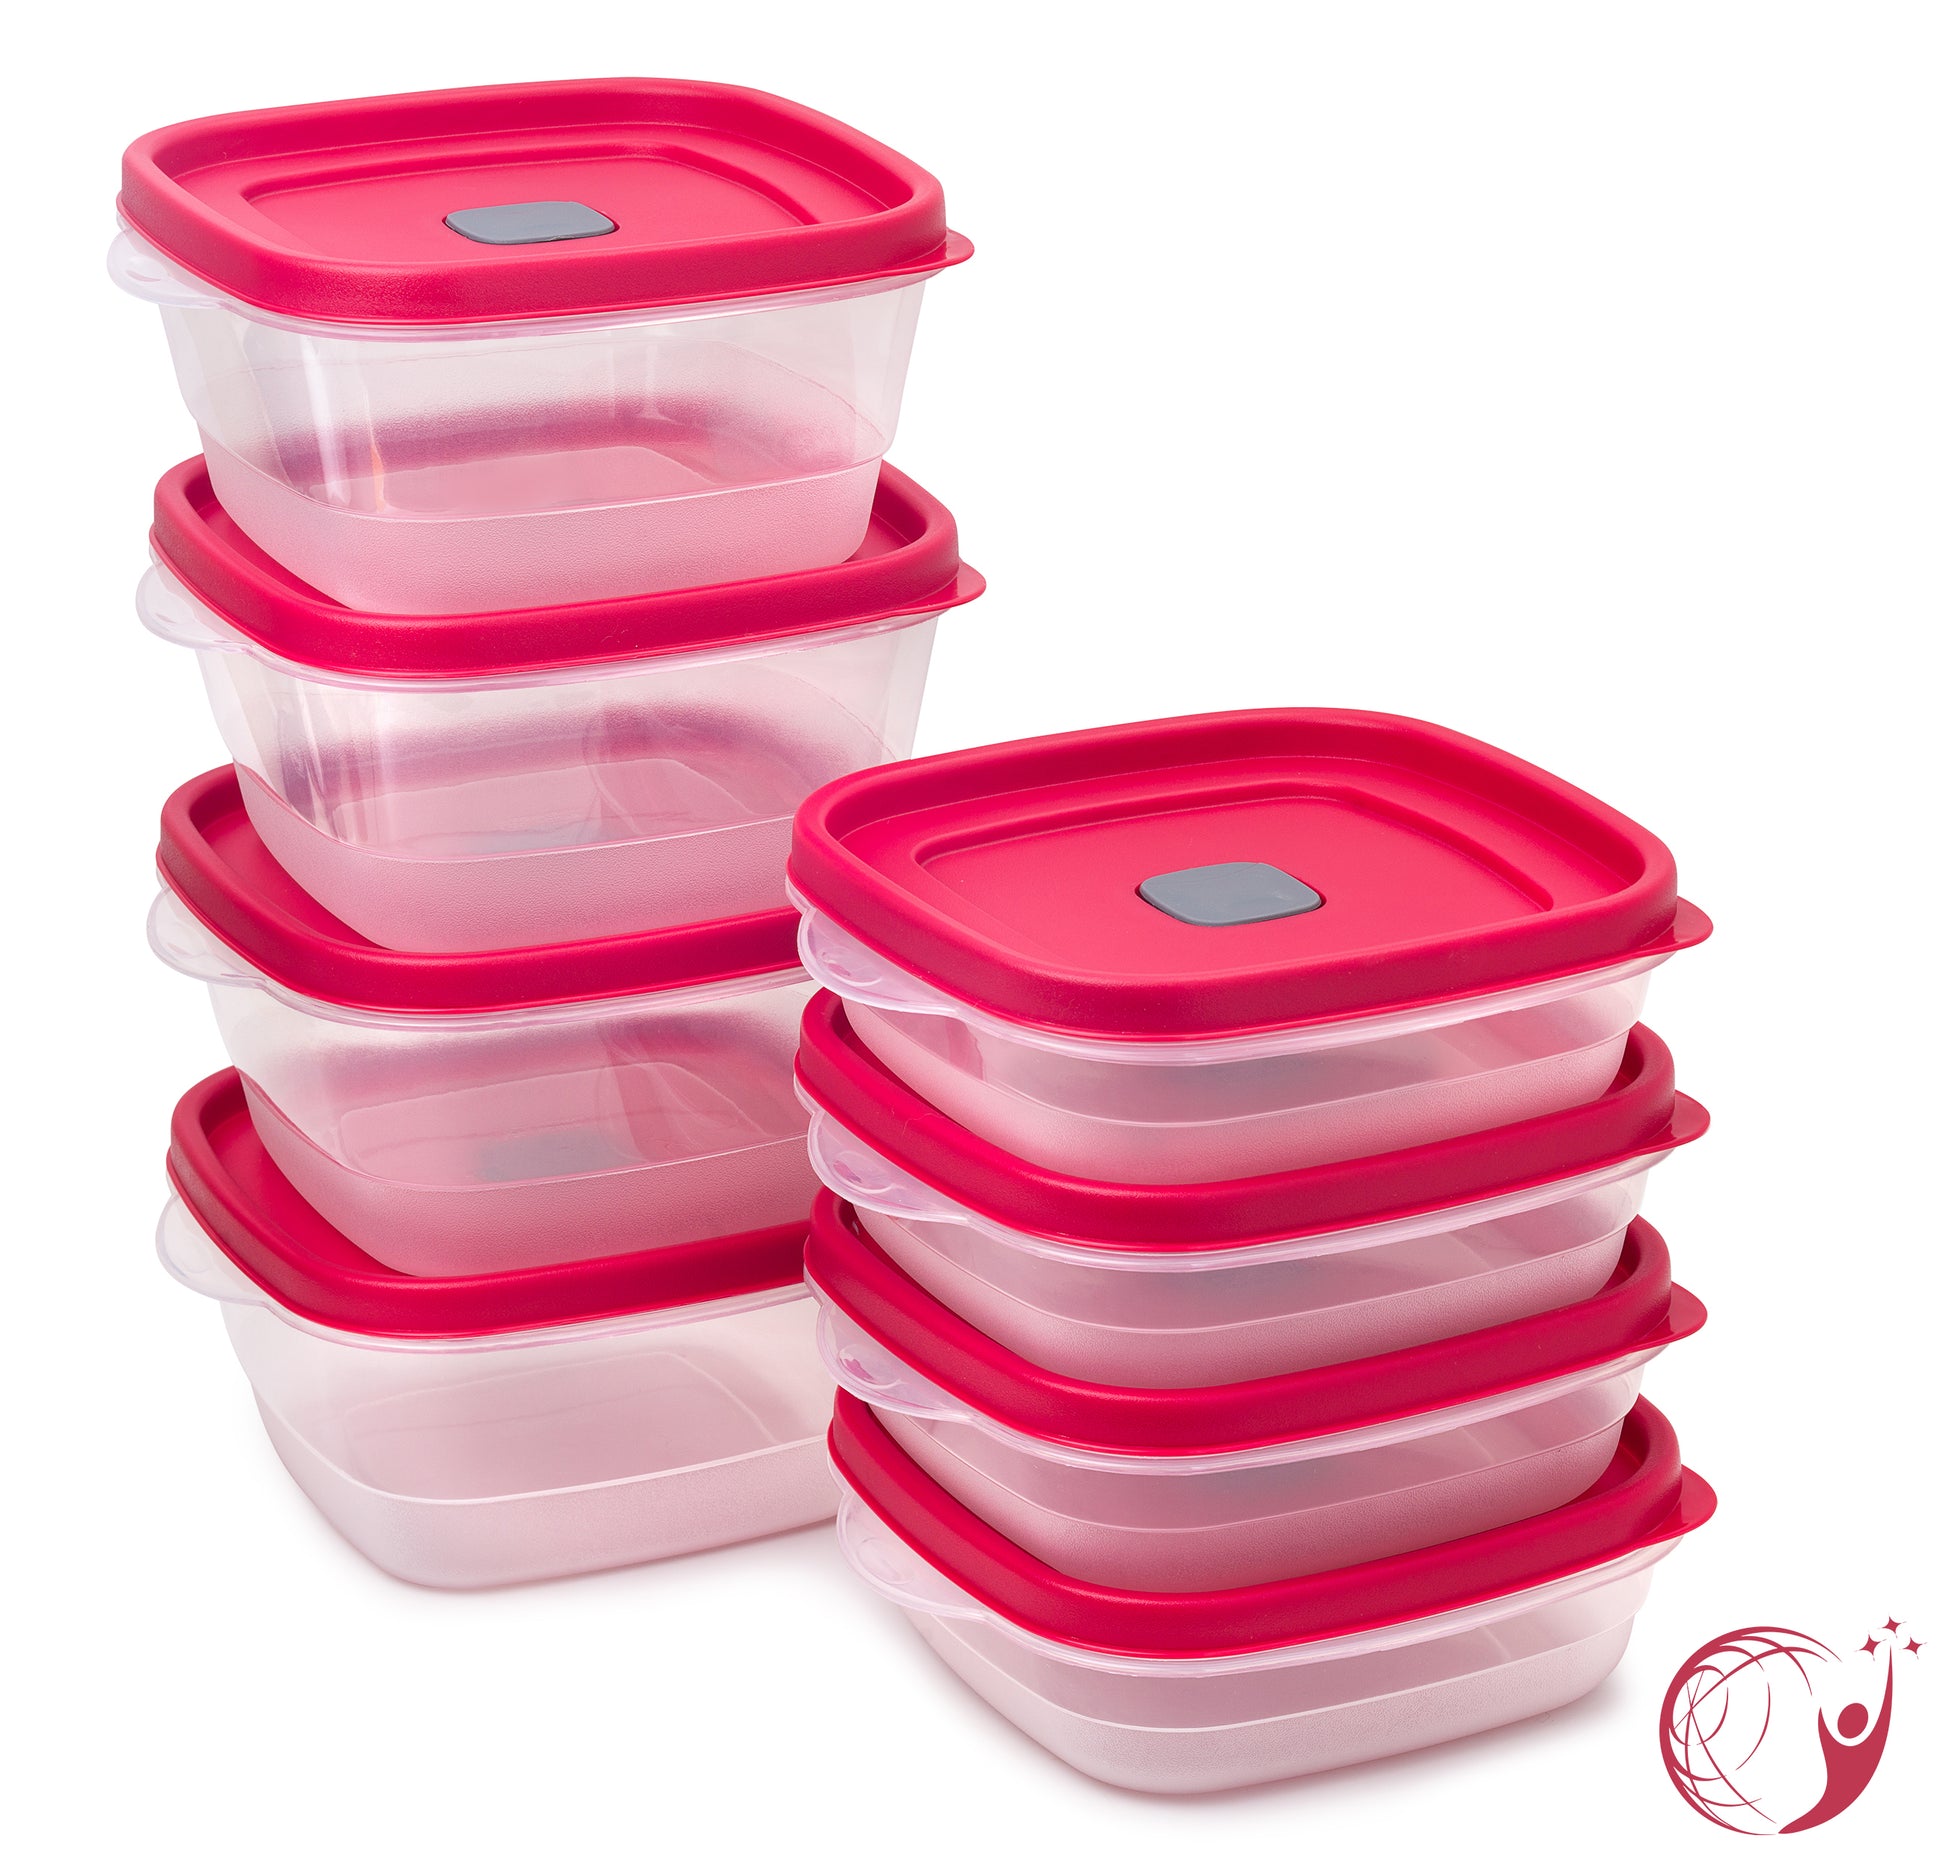 (3) RUBBERMAID 16 CUP FOOD STORAGE CONTAINERS, RECTANGULAR RED LID